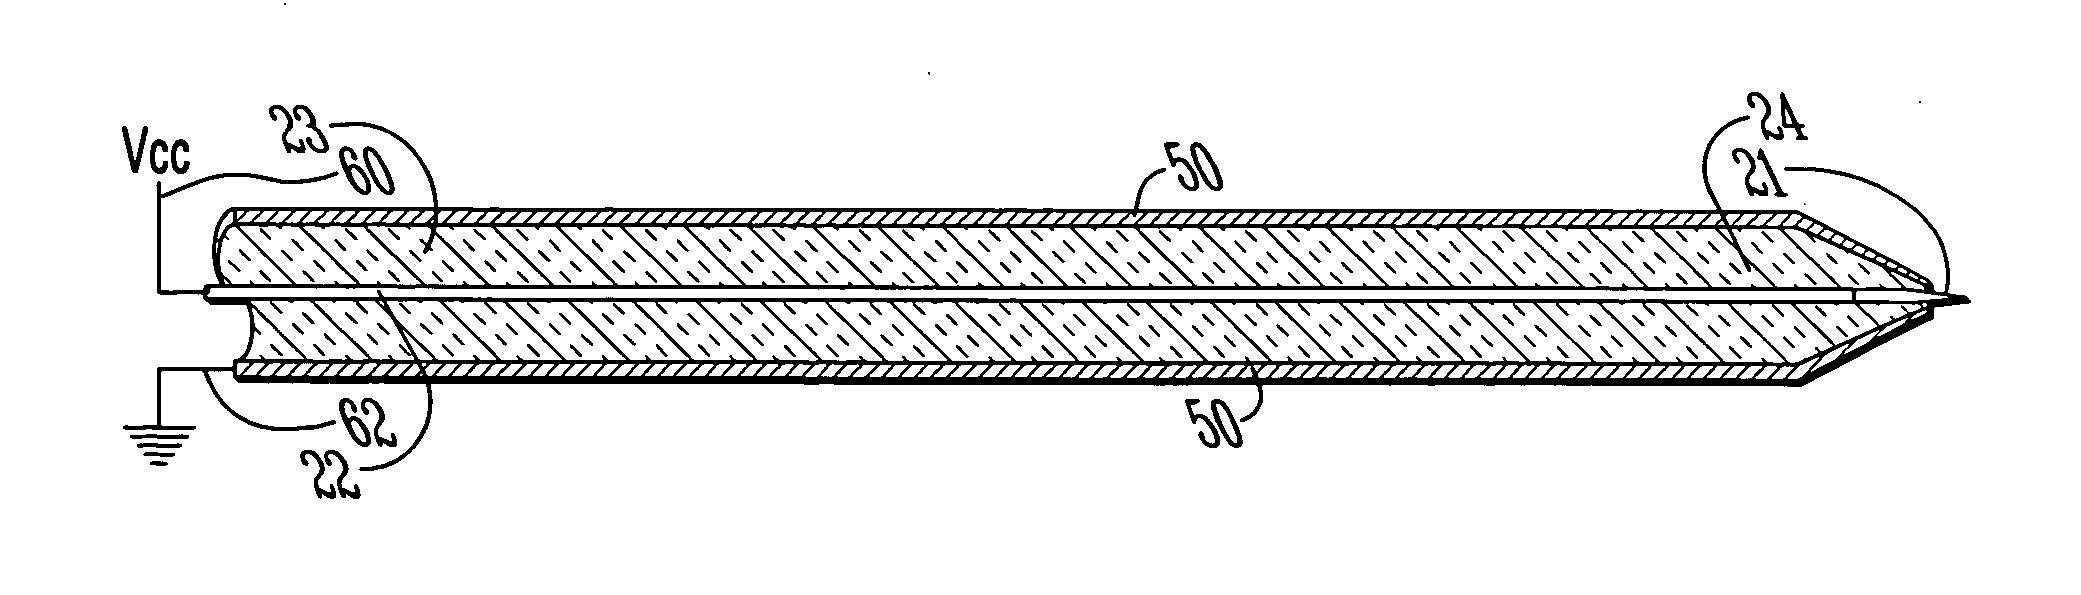 Apparatus for automated fresh tissue sectioning